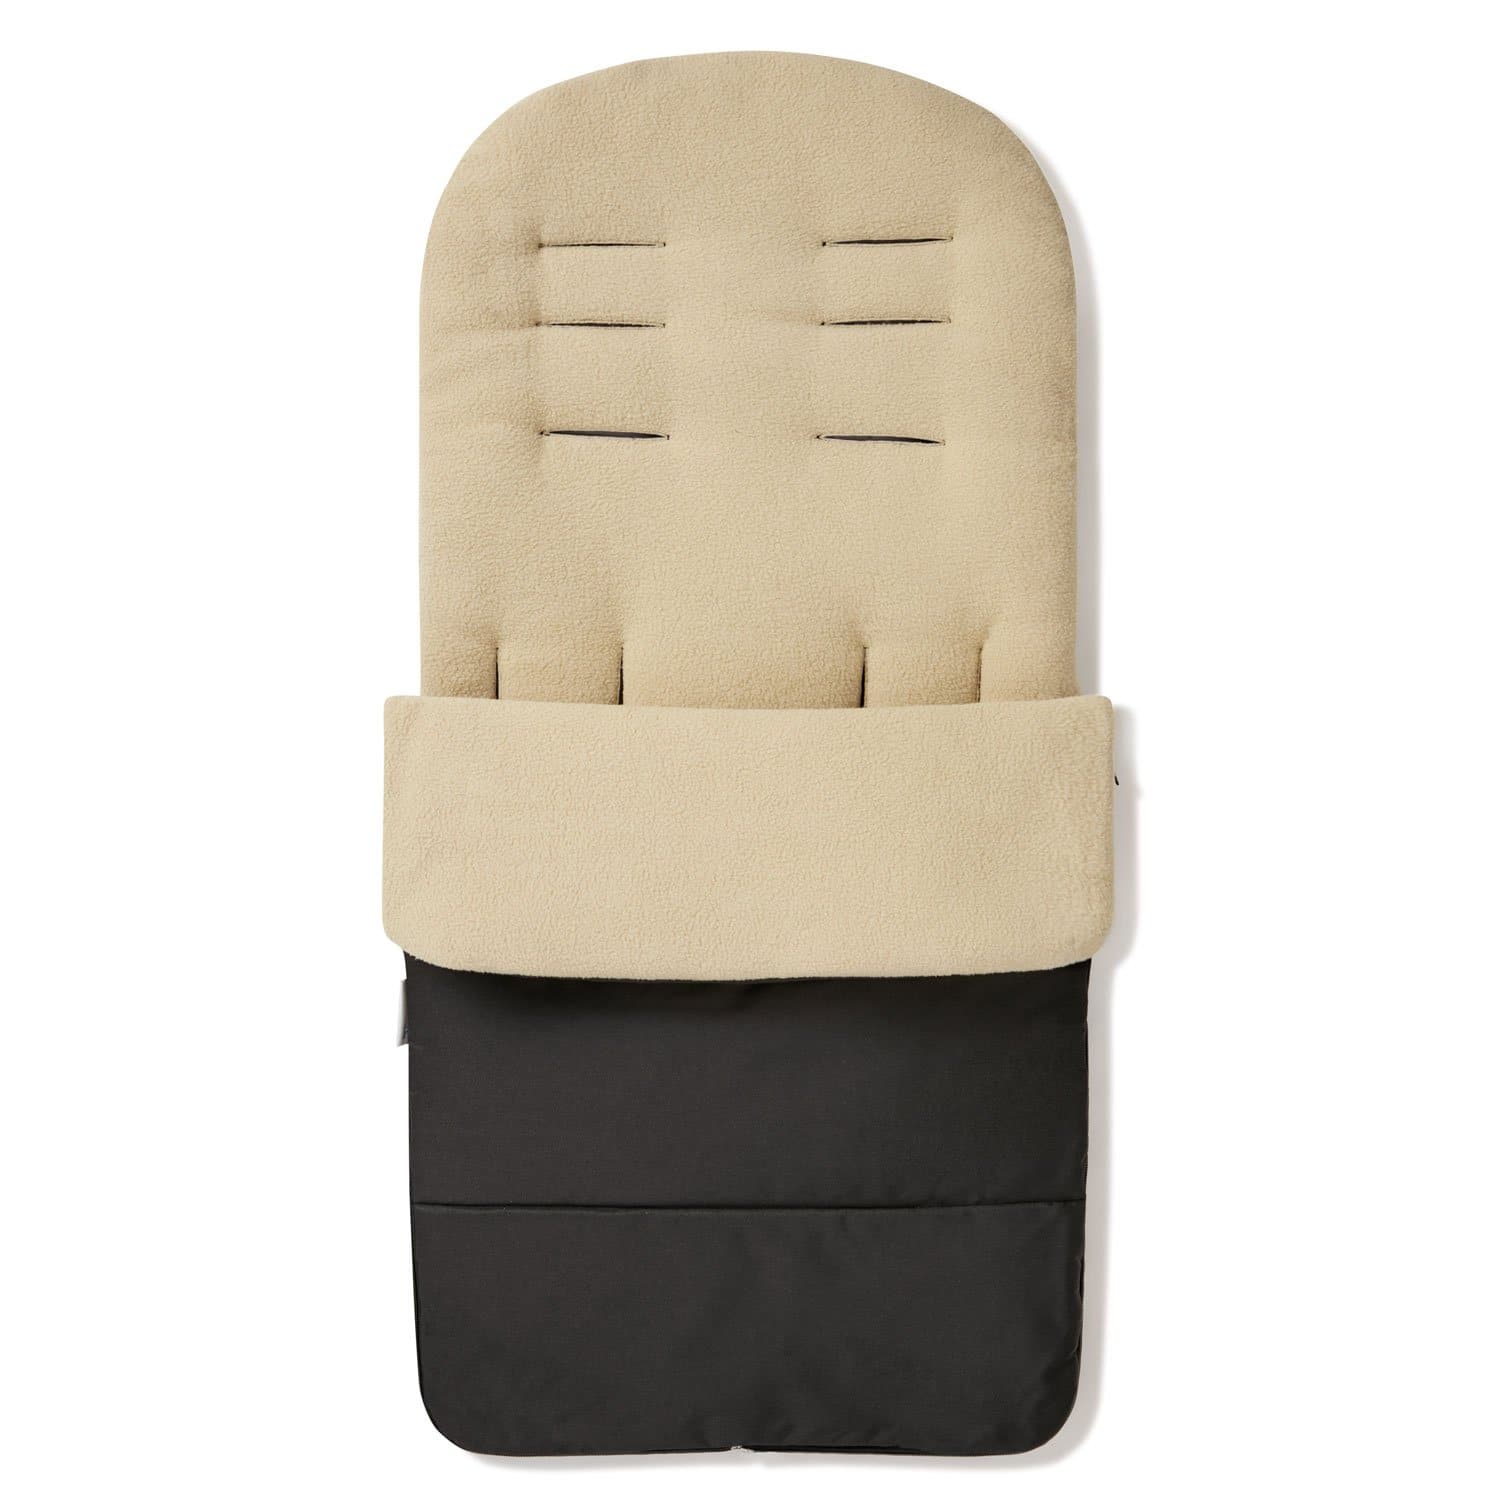 Premium Footmuff / Cosy Toes Compatible with My Child - Desert Sand / Fits All Models | For Your Little One